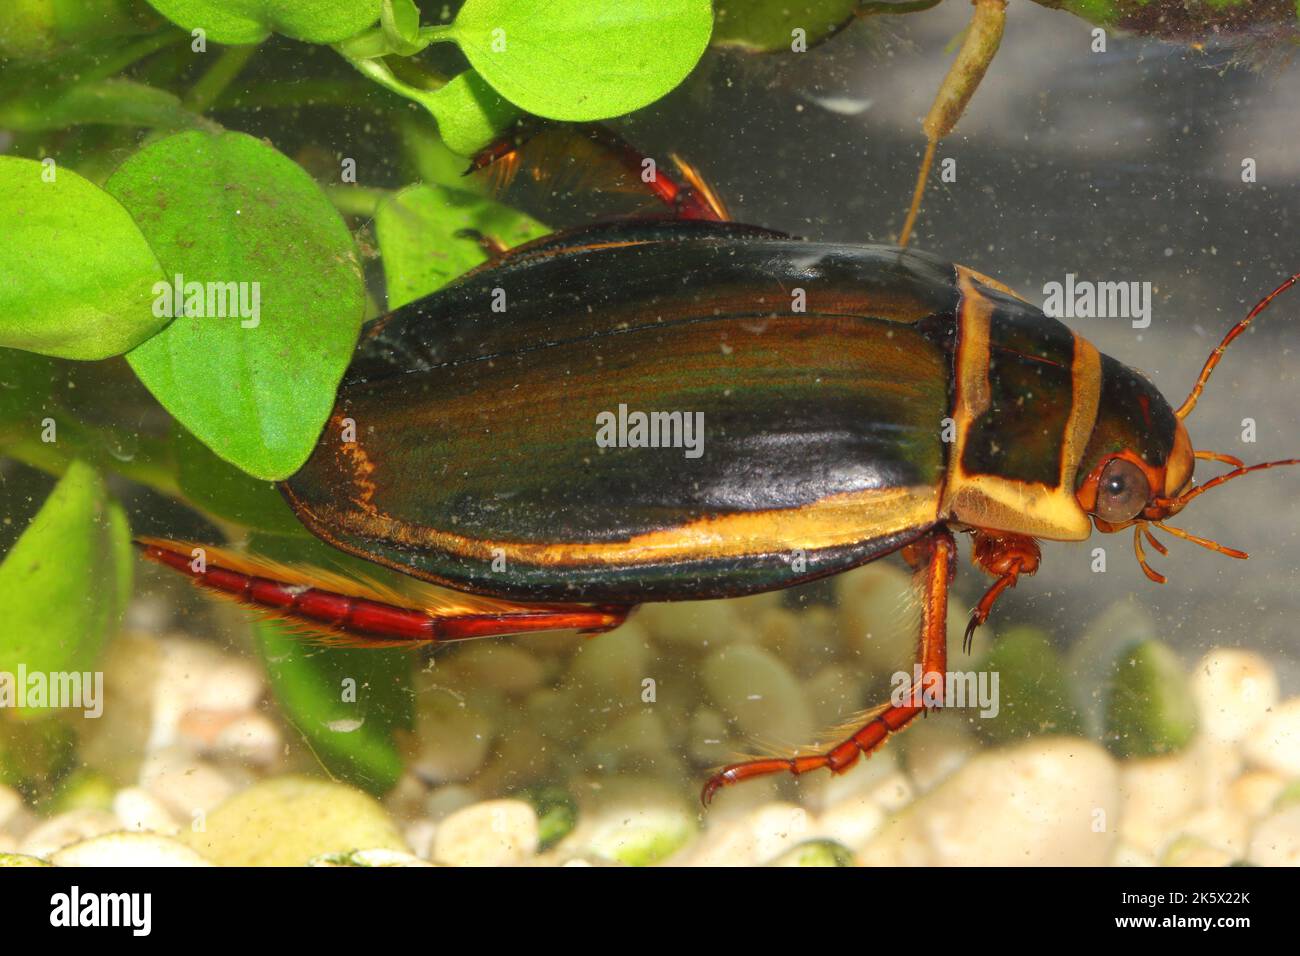 The diving beetle Dytiscus latissimus male in an underwater habitat Stock Photo